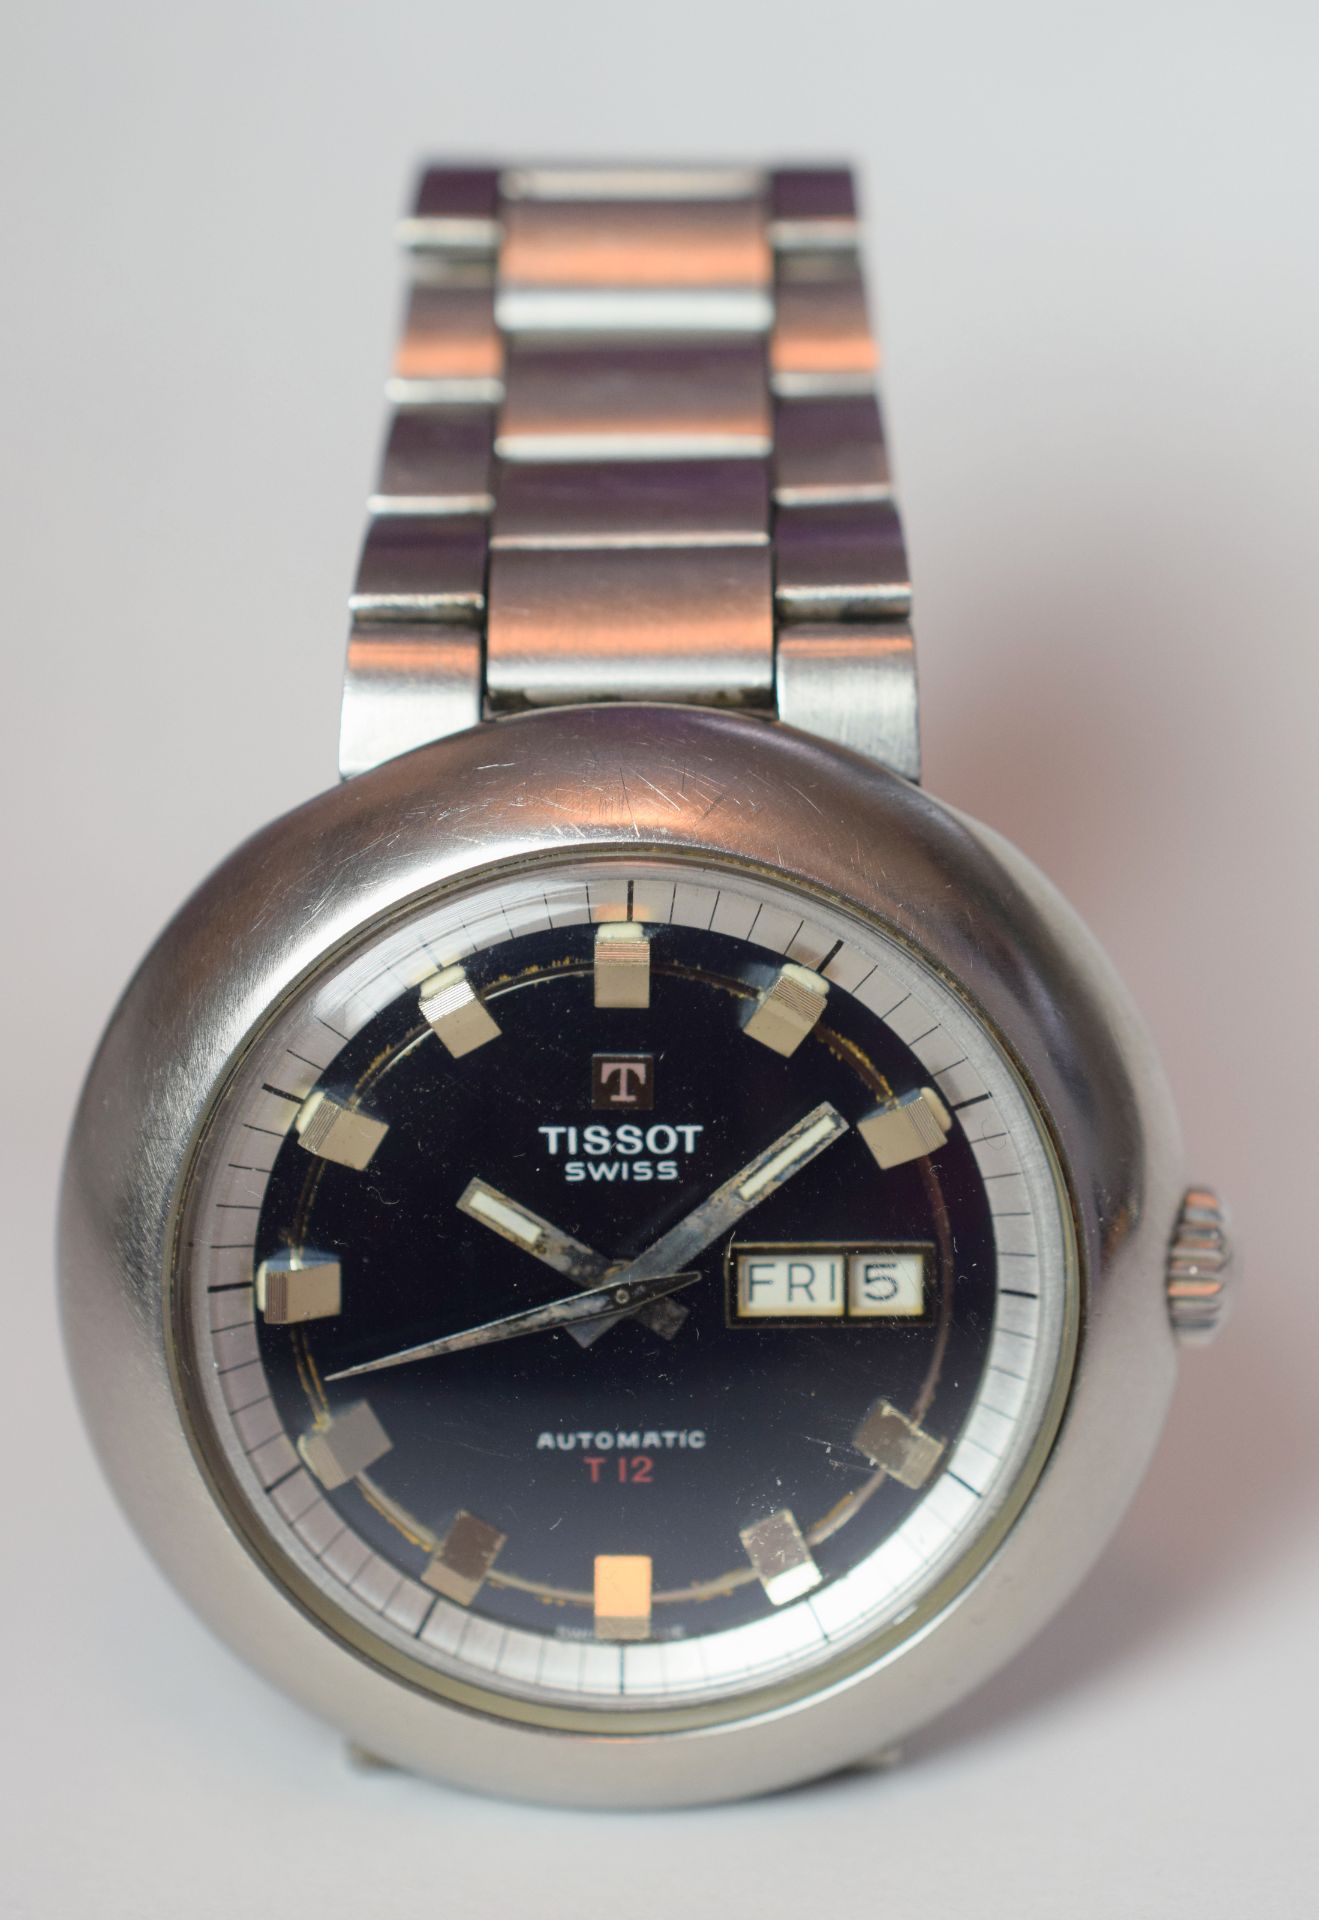 Tissot Automatic T12 On Stainless Steel Bracelet